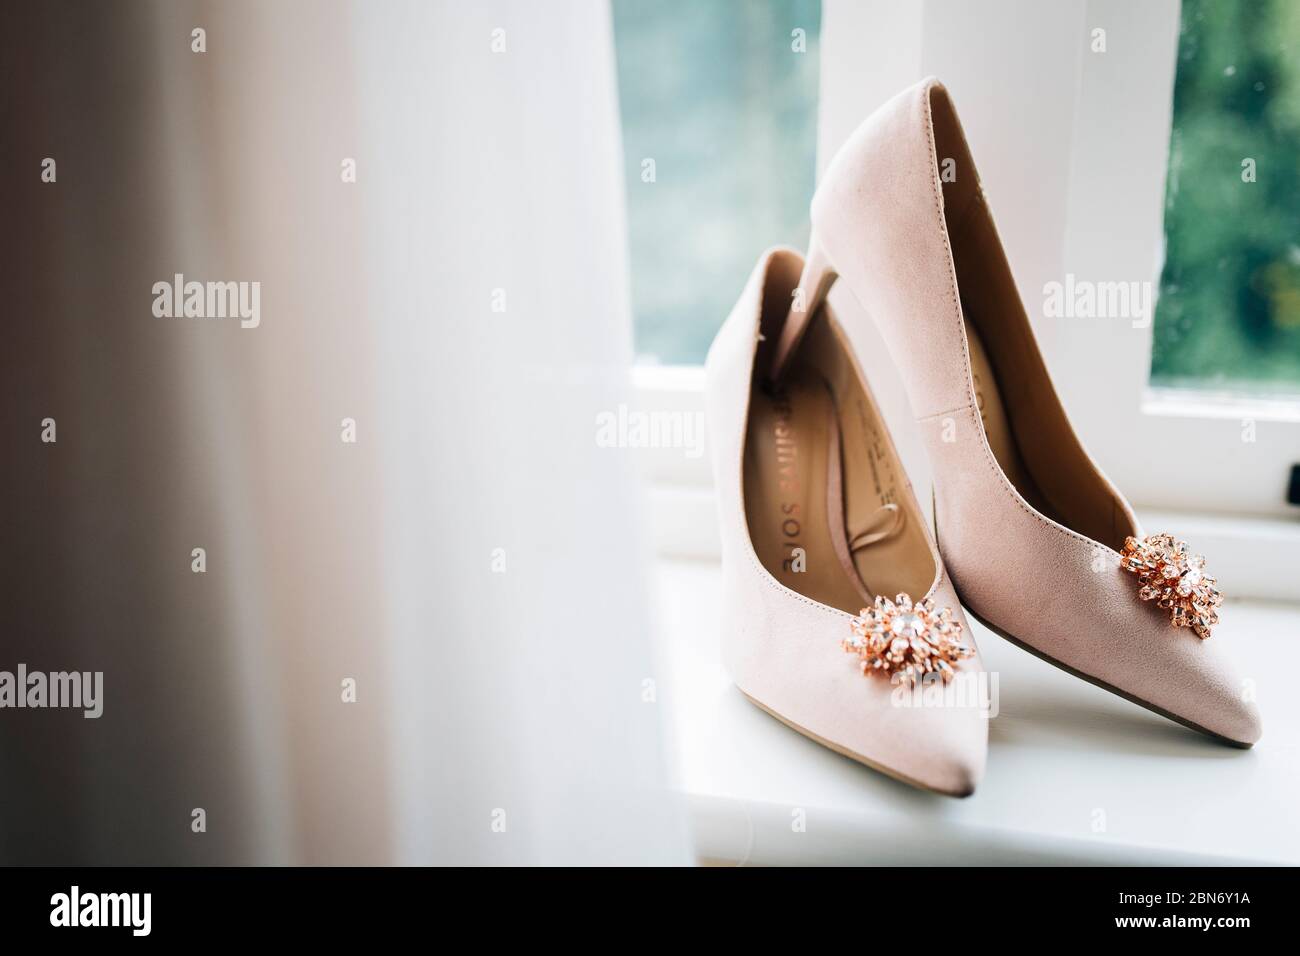 Bride's wedding shoes in windowsill during morning preparations. British wedding photography Stock Photo